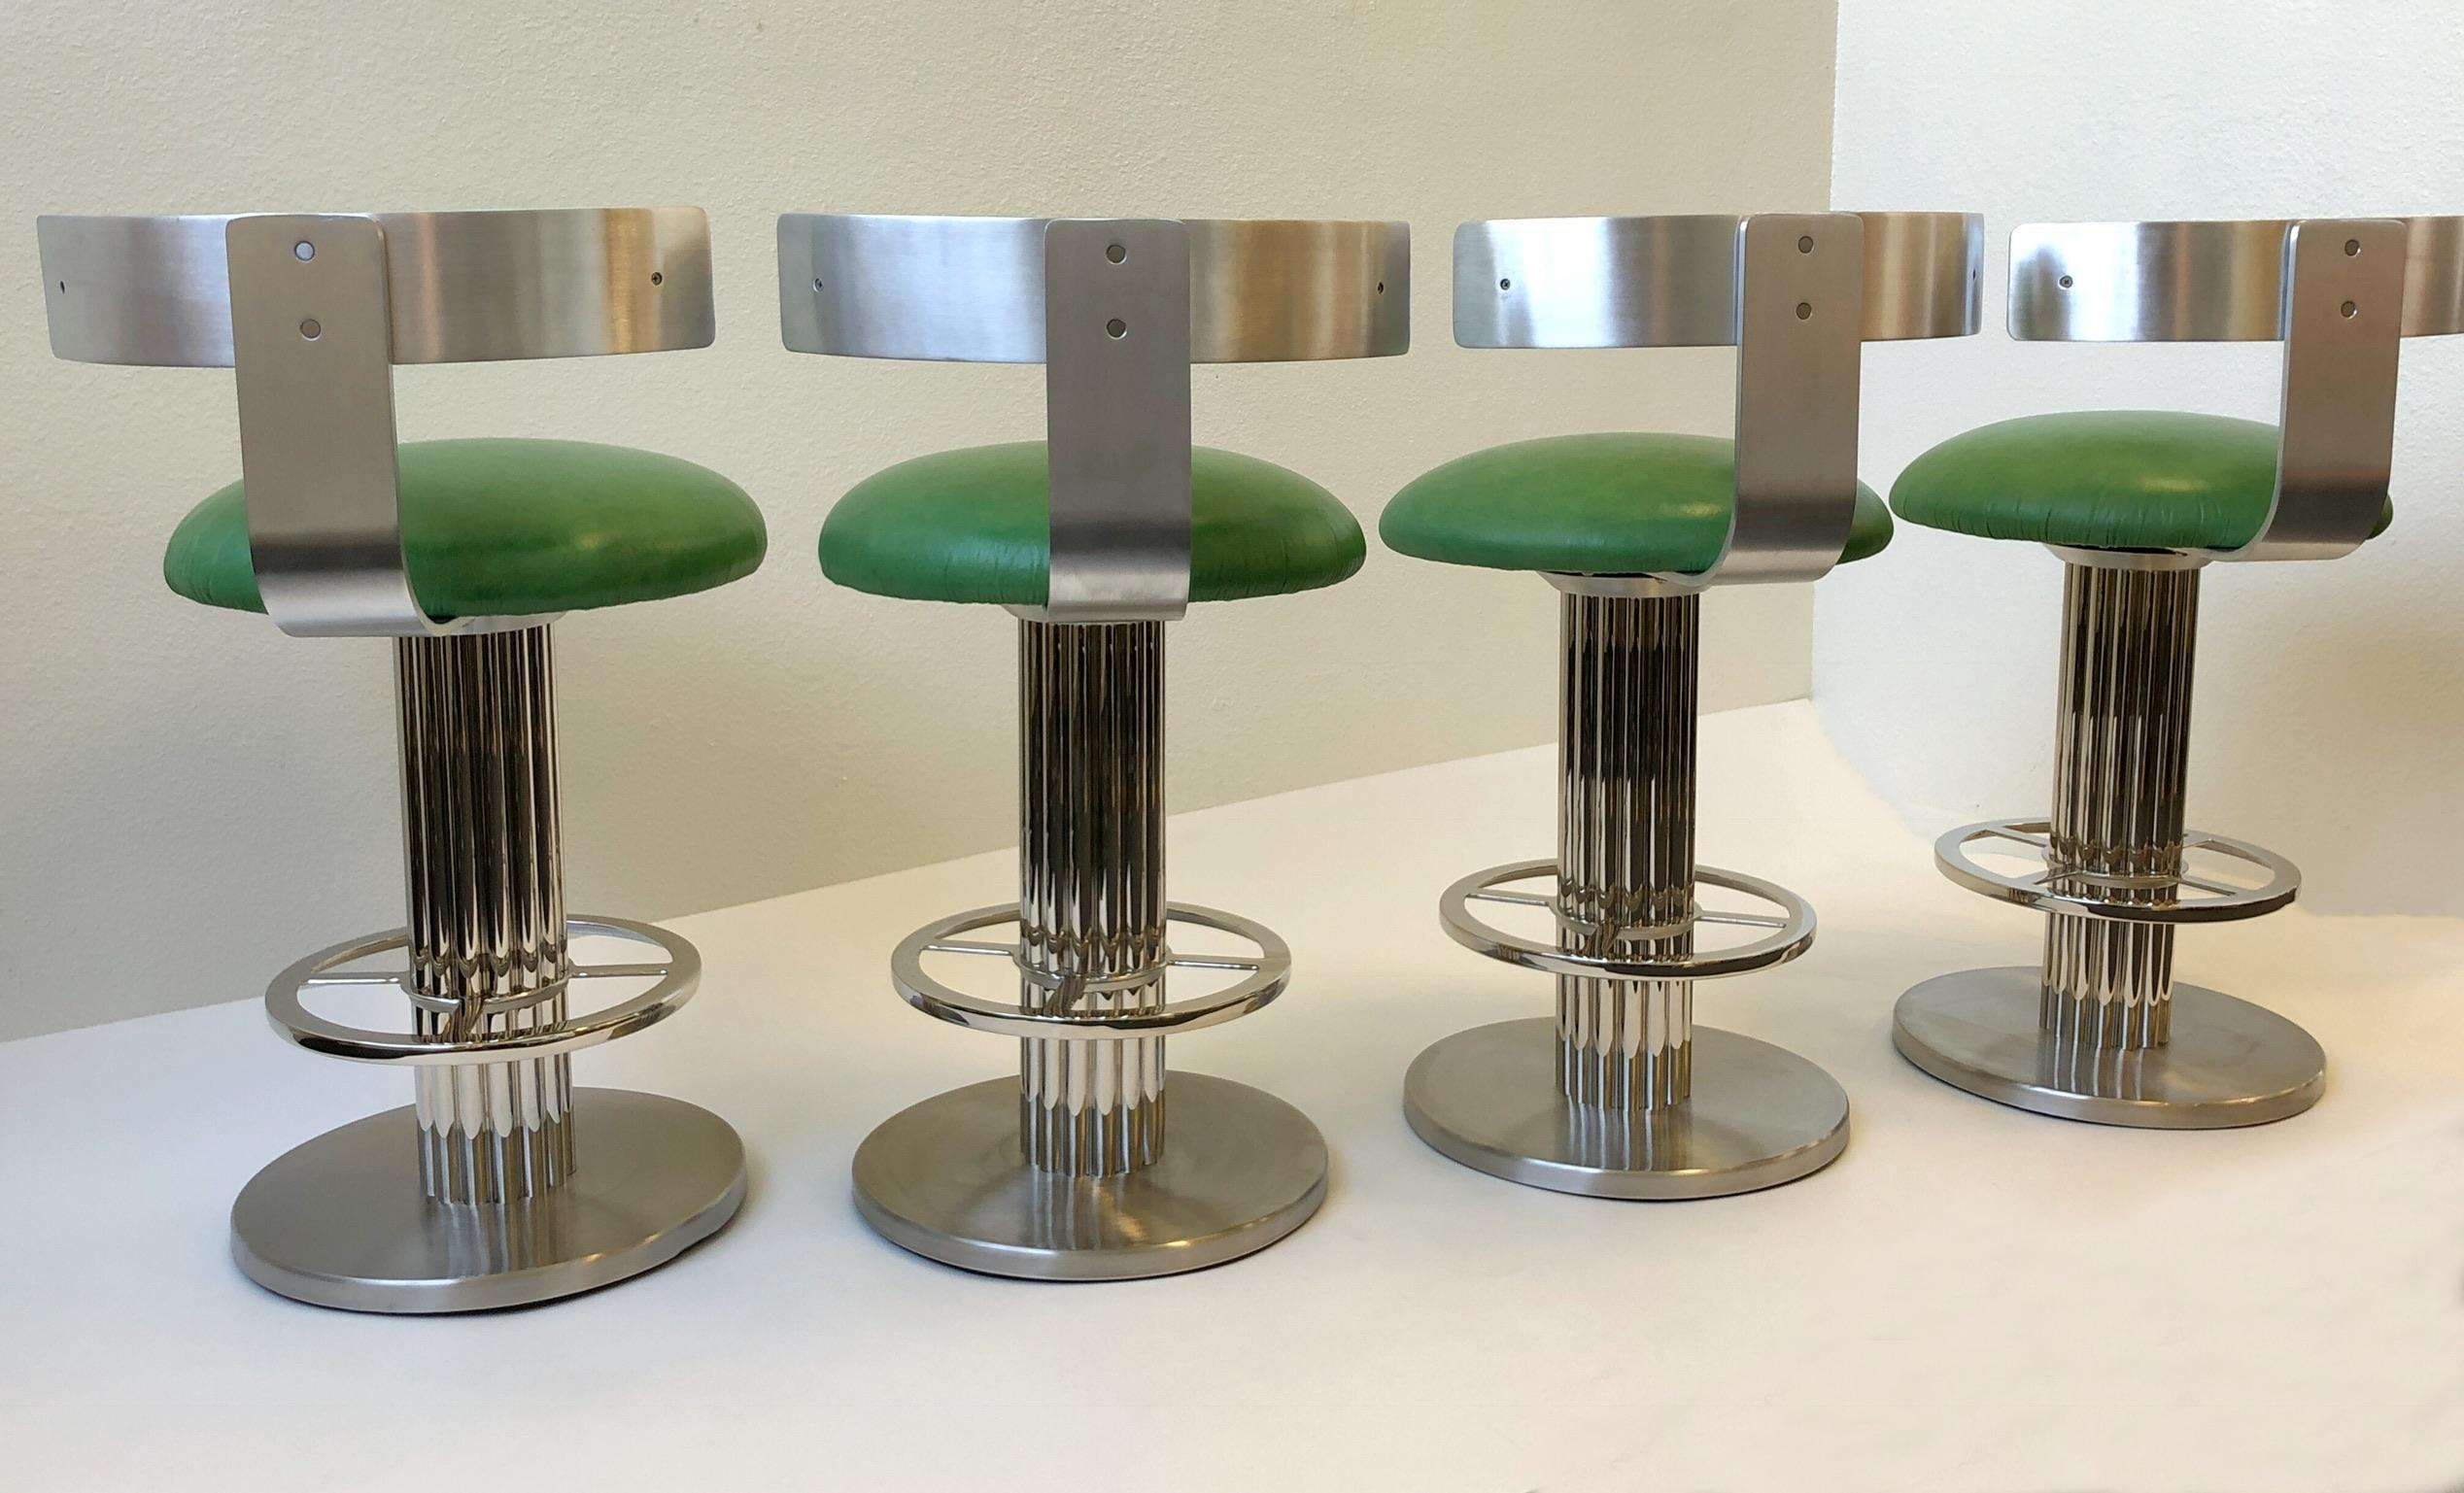 A glamorous set of four aluminium and stainless steel barstools design in the 1980s by Design for Leisure Ltd. The barstool have been newly restored and recovered in a soft distress apple green leather. The stools swivel 360. 

Dimensions: 33”